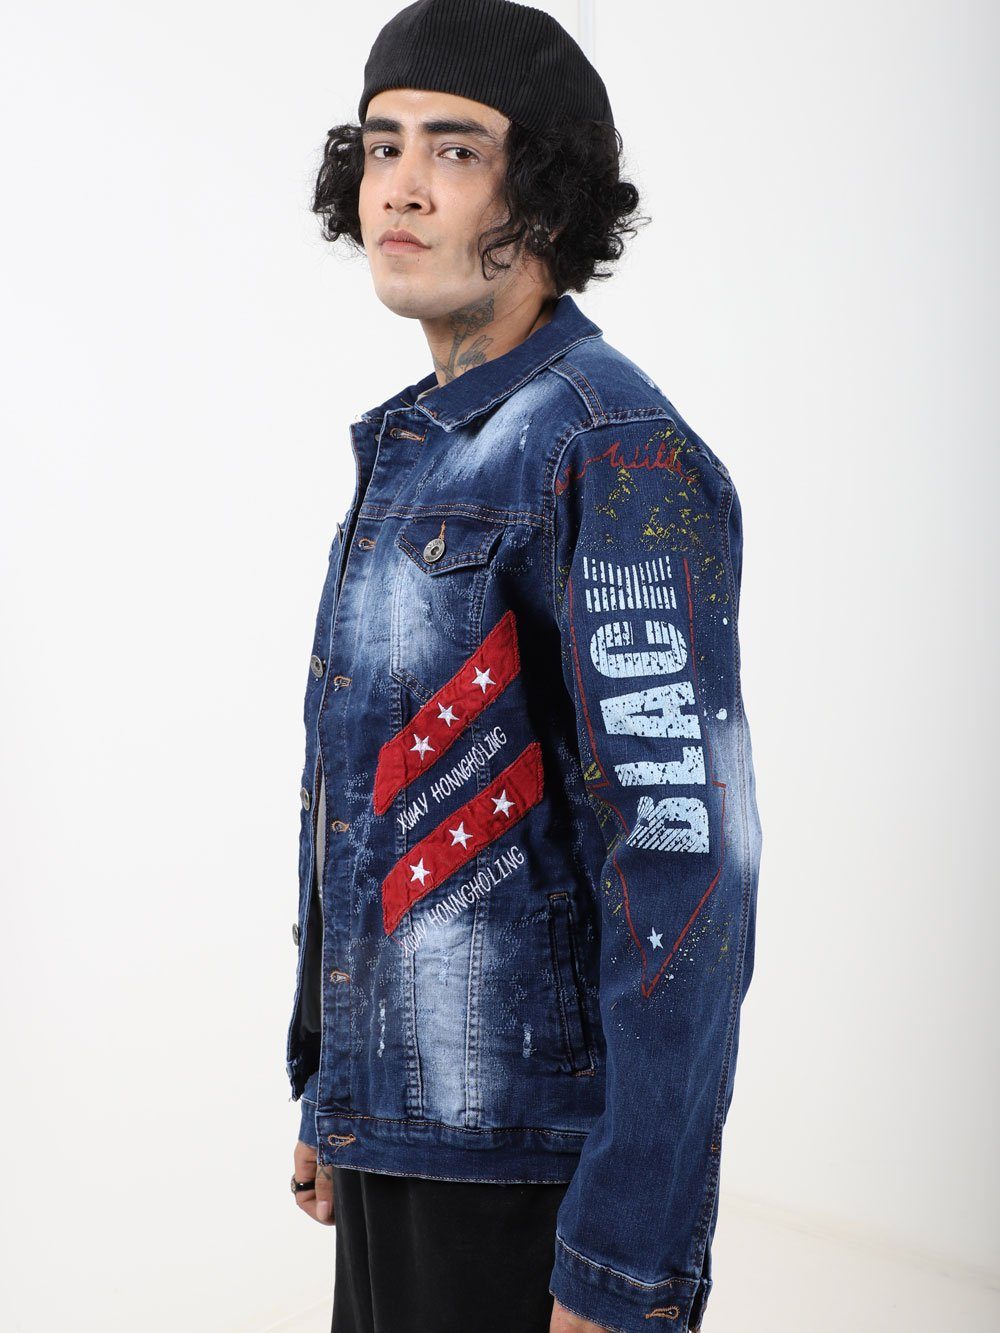 A man wearing an OLD PAINTING denim jacket with stars and stripes on it.